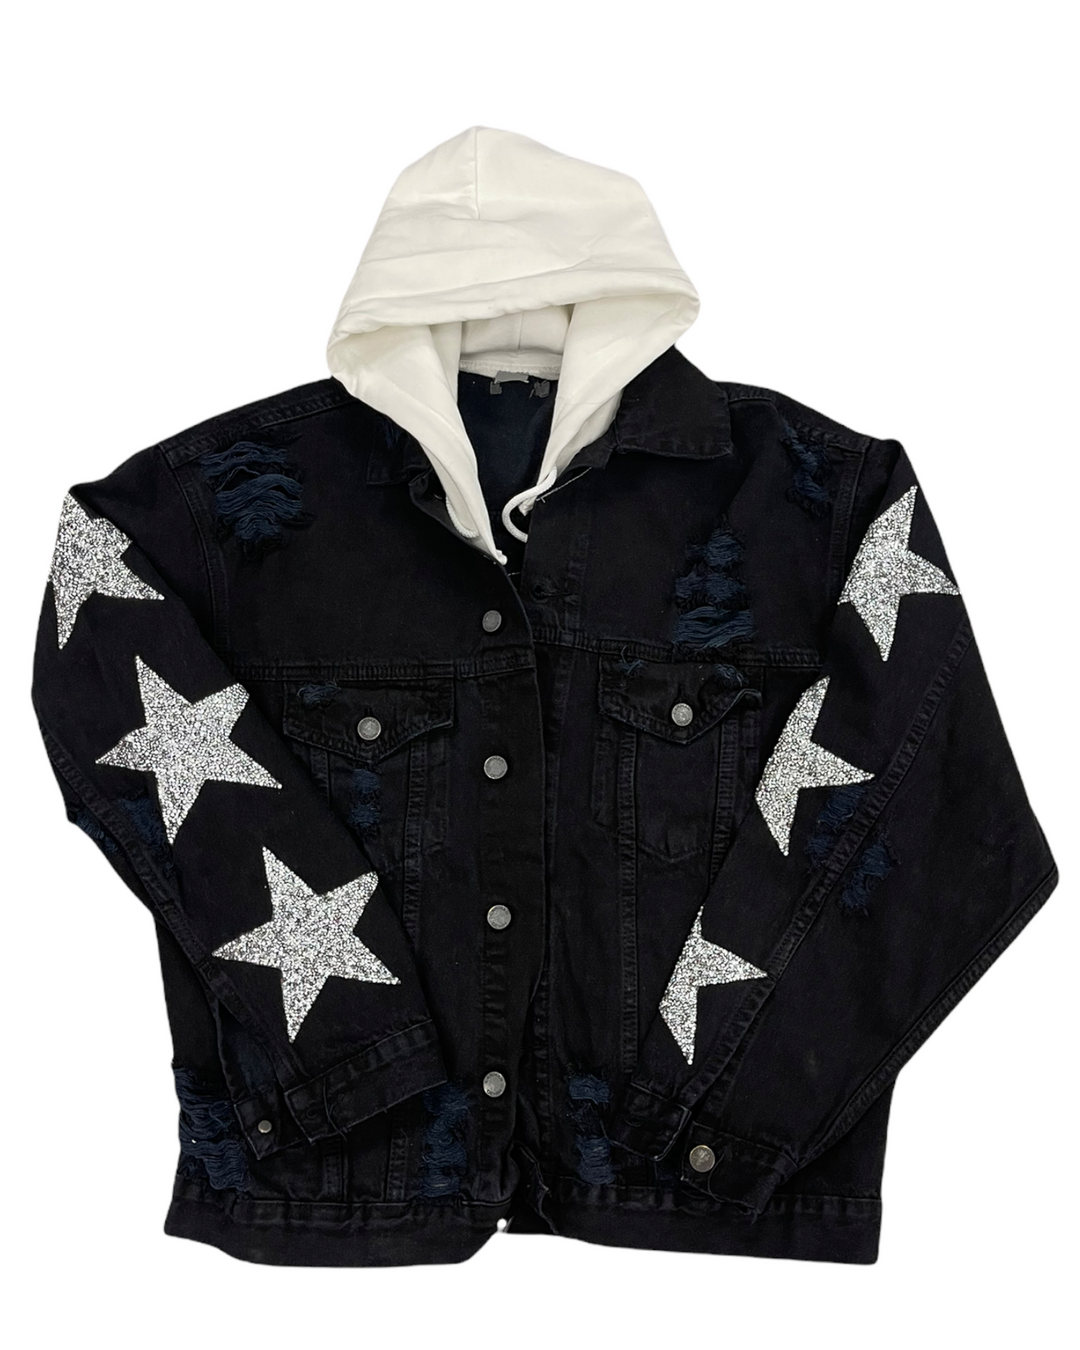 Wisconsin Patched and Embellished Jean Jacket